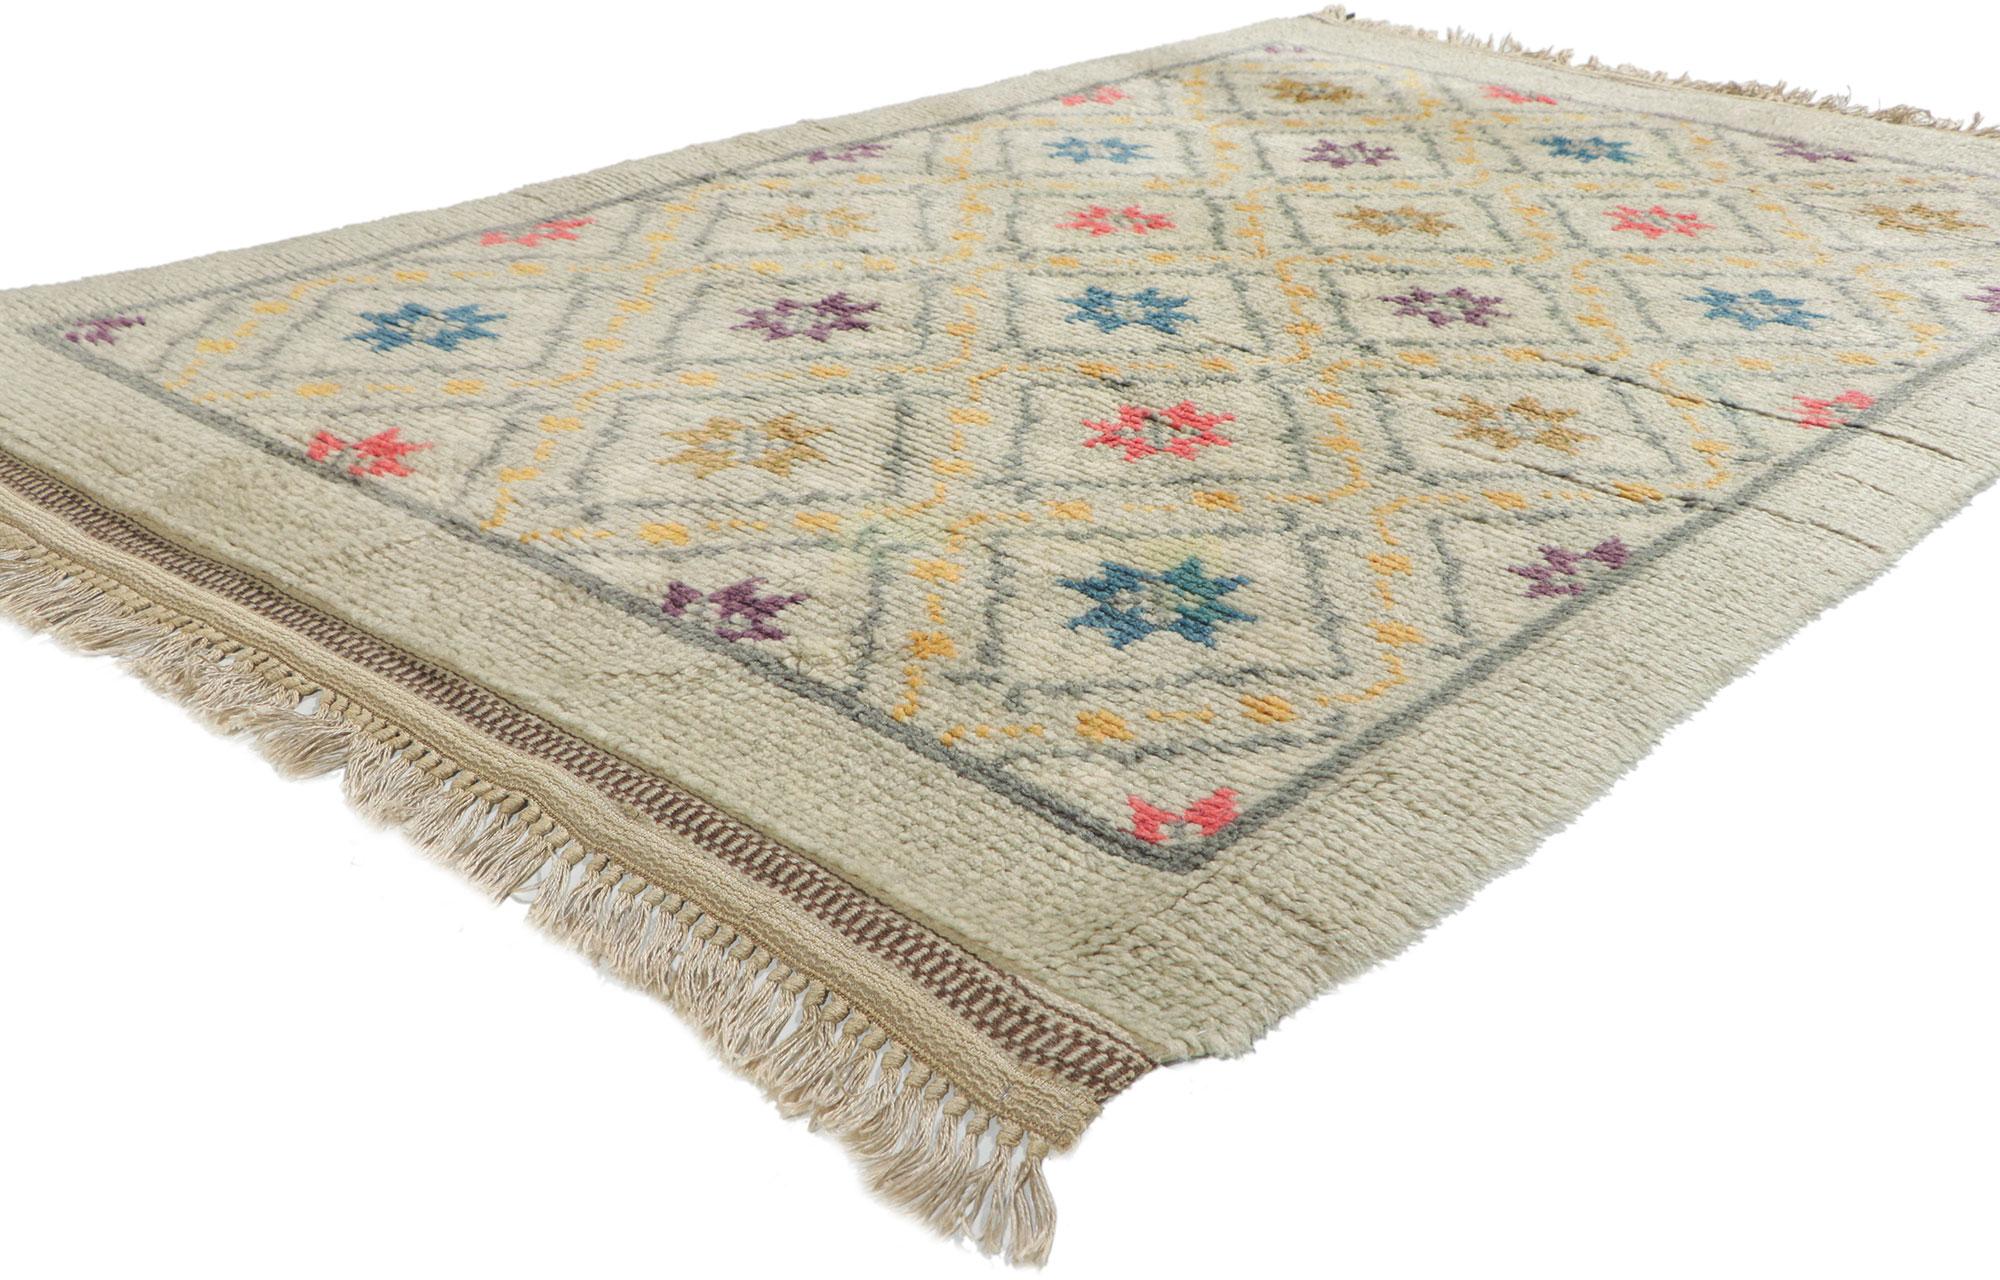 78509 Vintage Swedish Rya Rug, 04'04 x 06'06
Emanating Scandinavian Modern style with incredible detail and texture, this hand knotted Swedish rya rug is a captivating vision of woven beauty. The eye-catching lozenge lattice and happy color palette